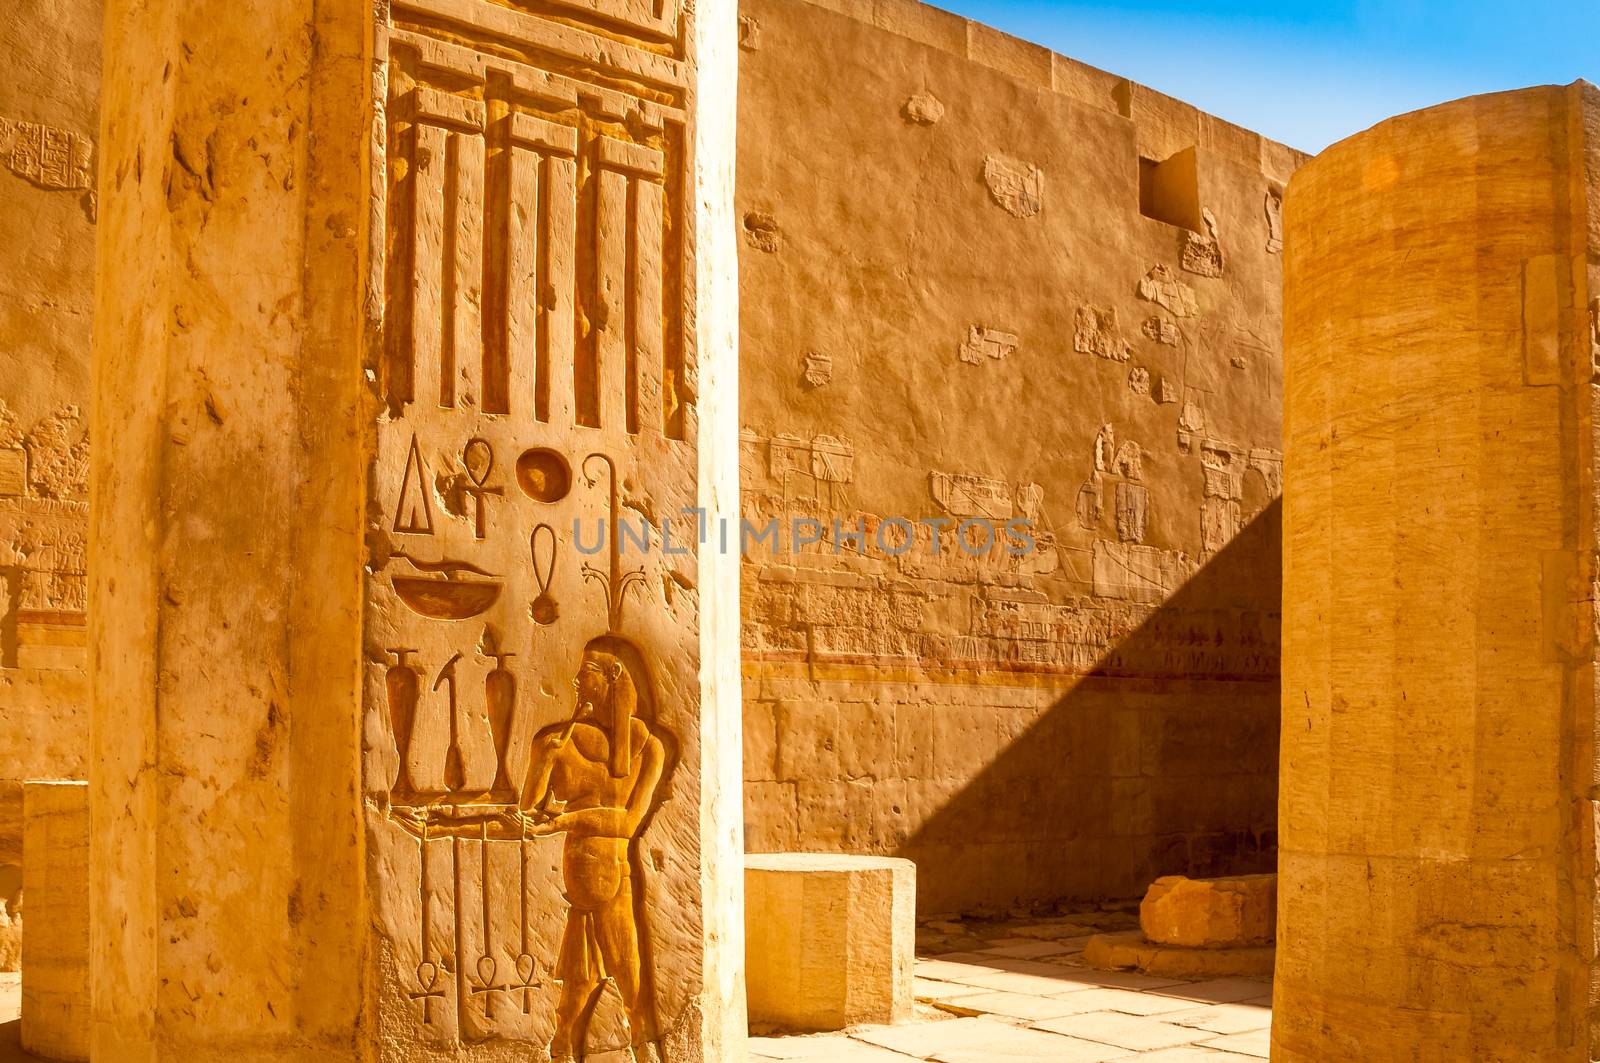 Detail of ancient hieroglyphs carved in stone walls, Queen Hatshepsut temple, Egypt